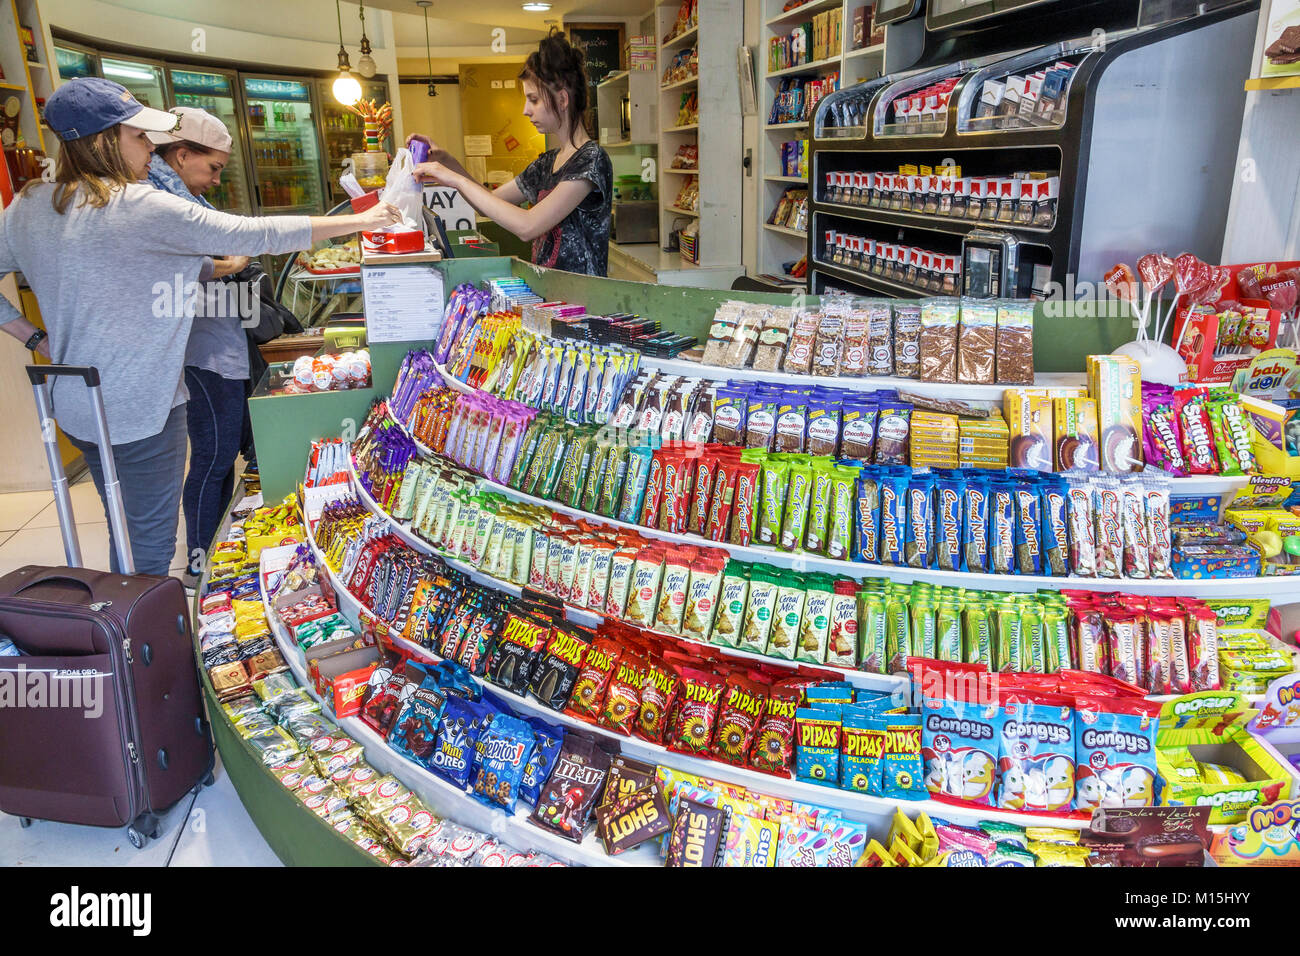 Buenos Aires Argentina,convenience store,snack shop,chocolate bars,cookies,sweets,Hispanic,woman female women,cashier,transaction paying pays buying b Stock Photo